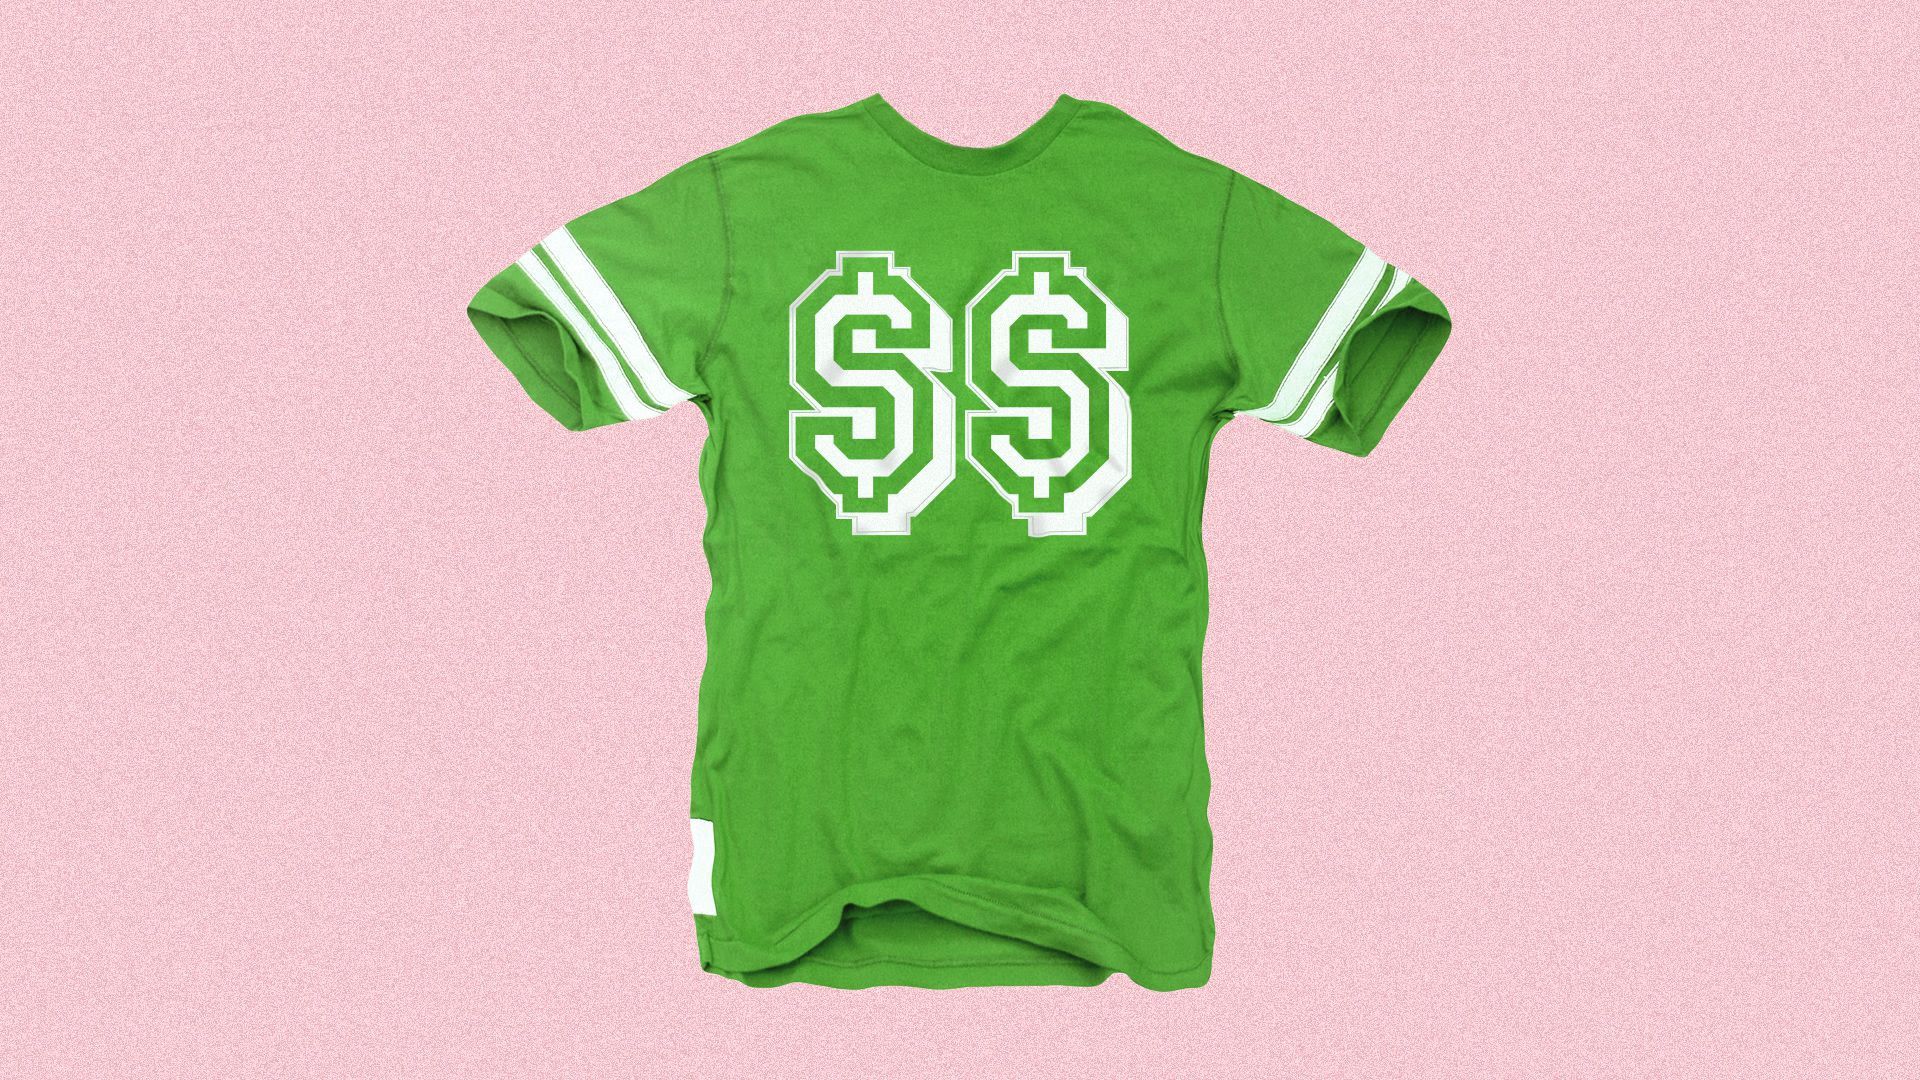 An illustration of a shirt with money signs on it.